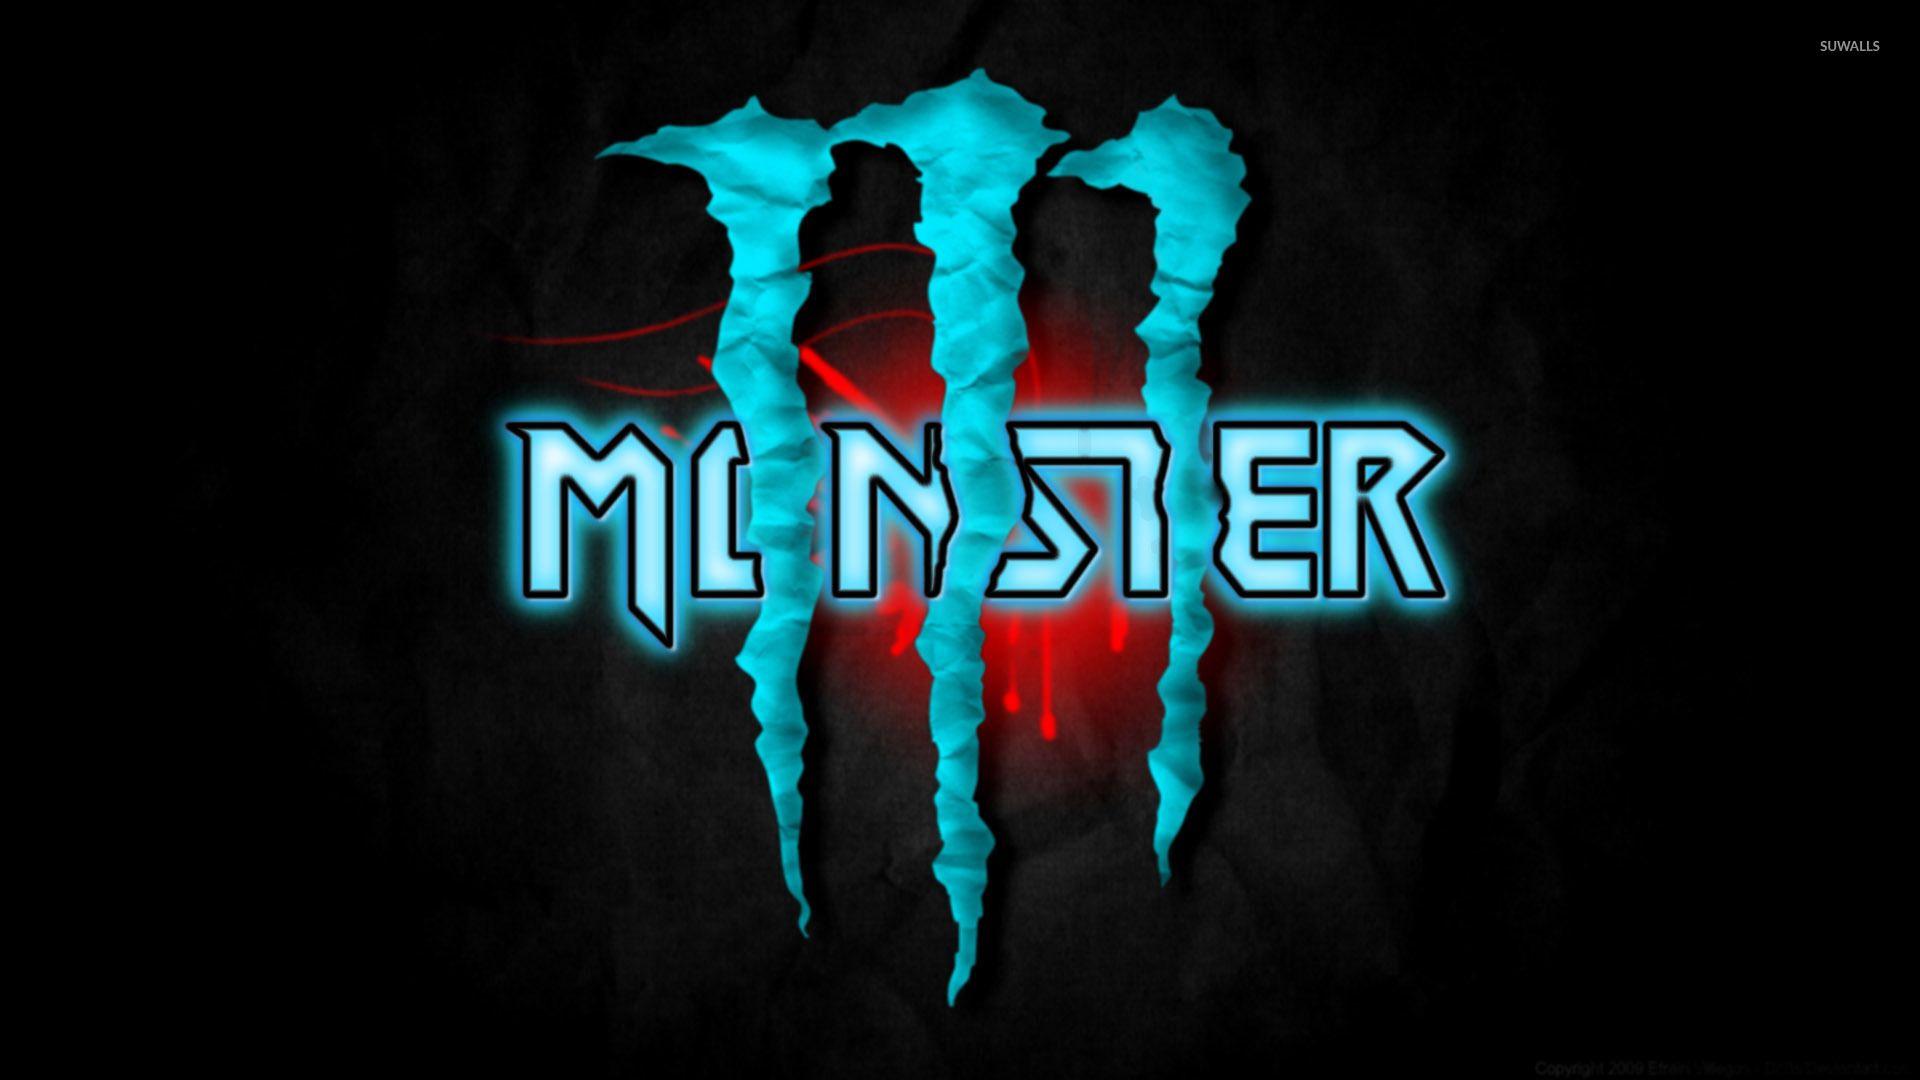 Monster Energy Wallpapers Top Free Monster Energy Backgrounds Wallpaperaccess